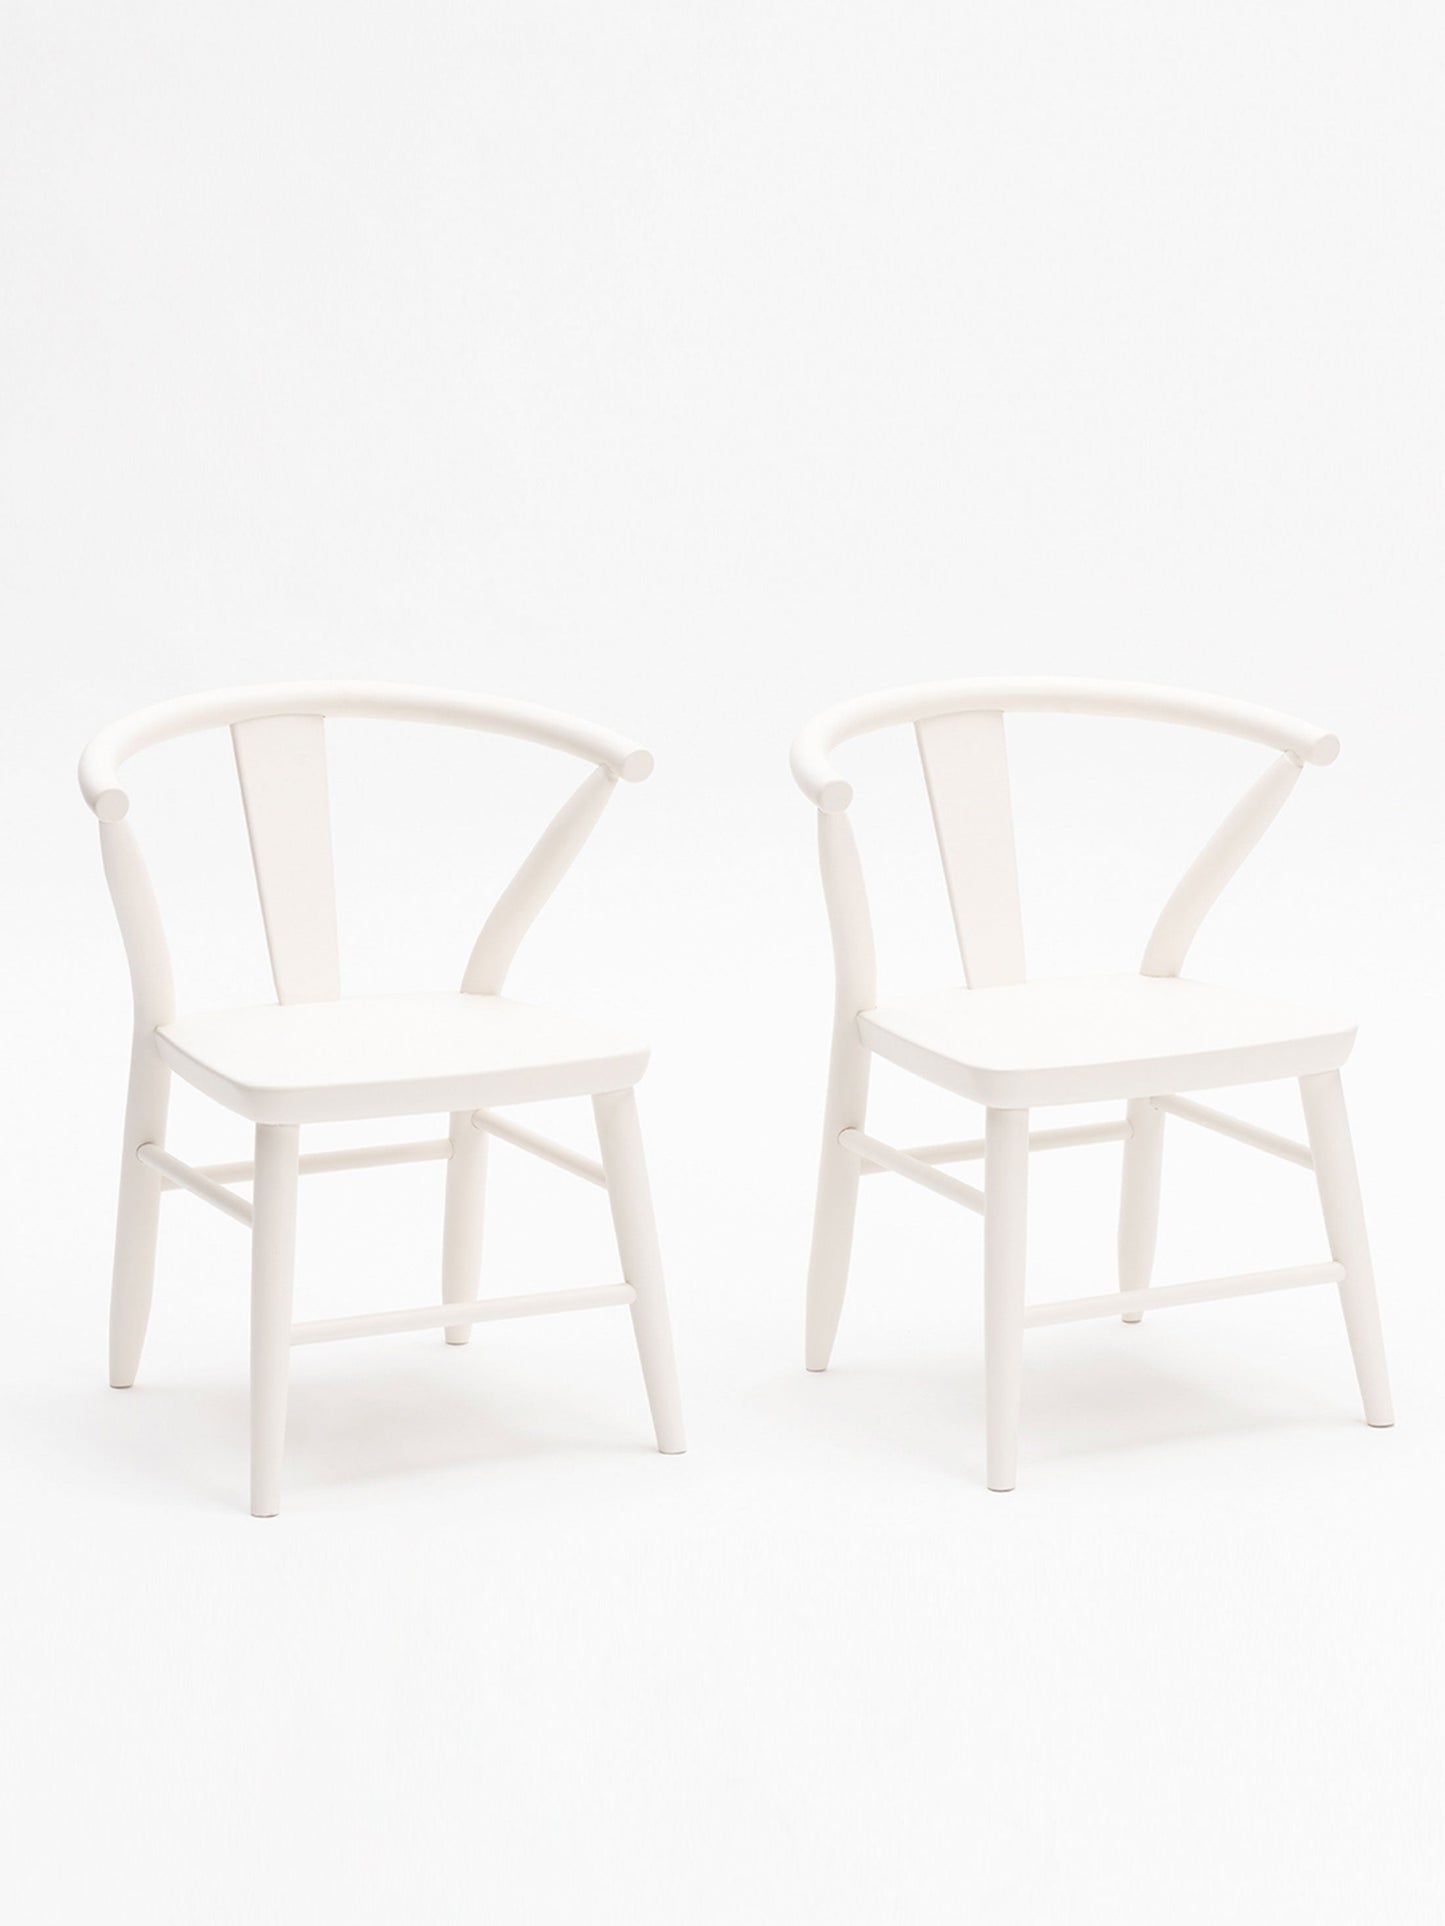 White crescent chairs by Milton and Goose